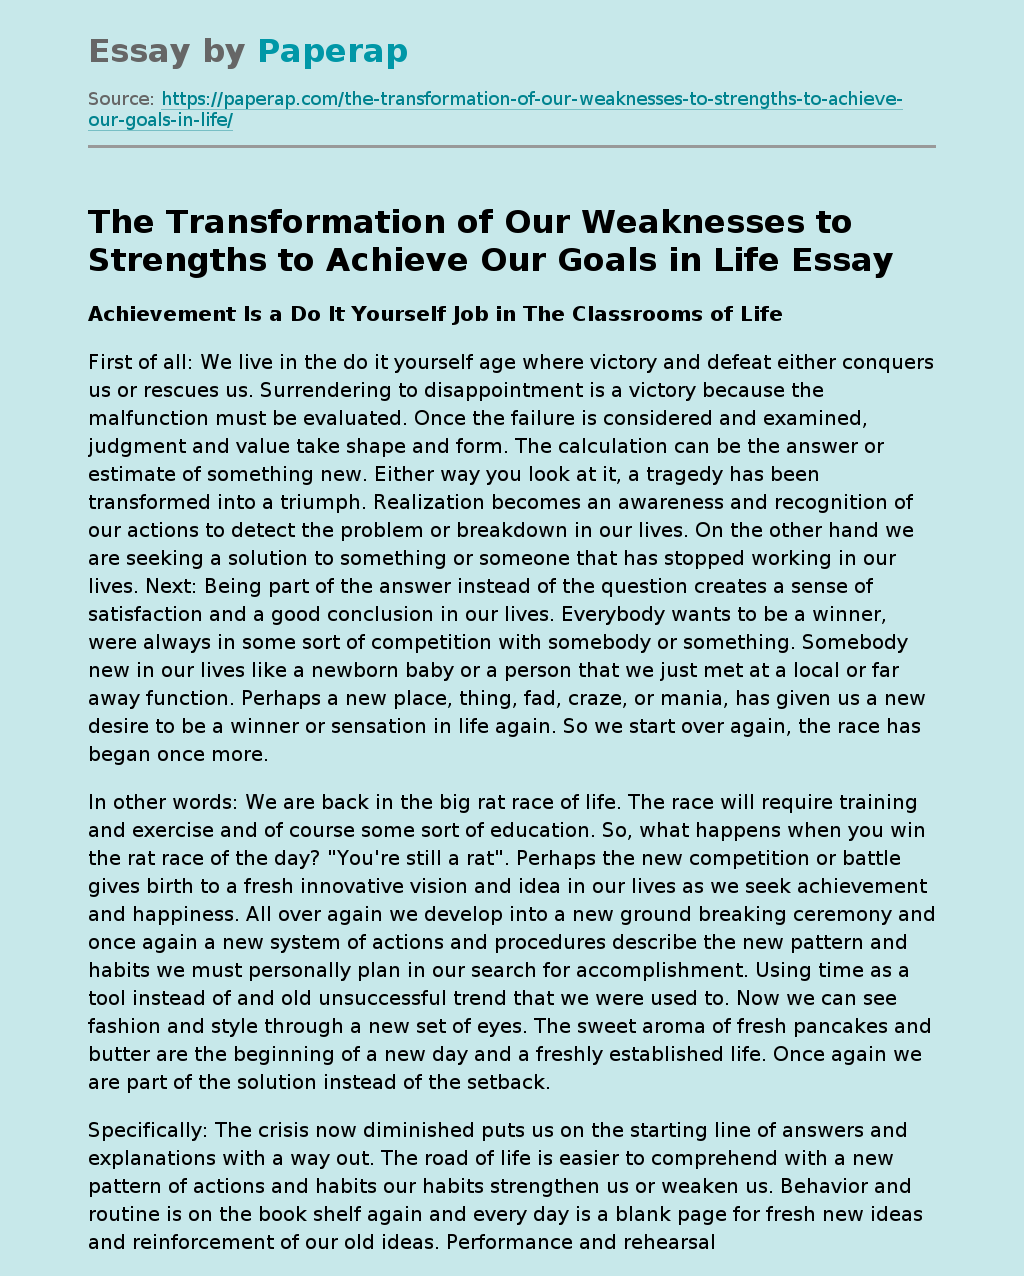 The Transformation of Our Weaknesses to Strengths to Achieve Our Goals in Life